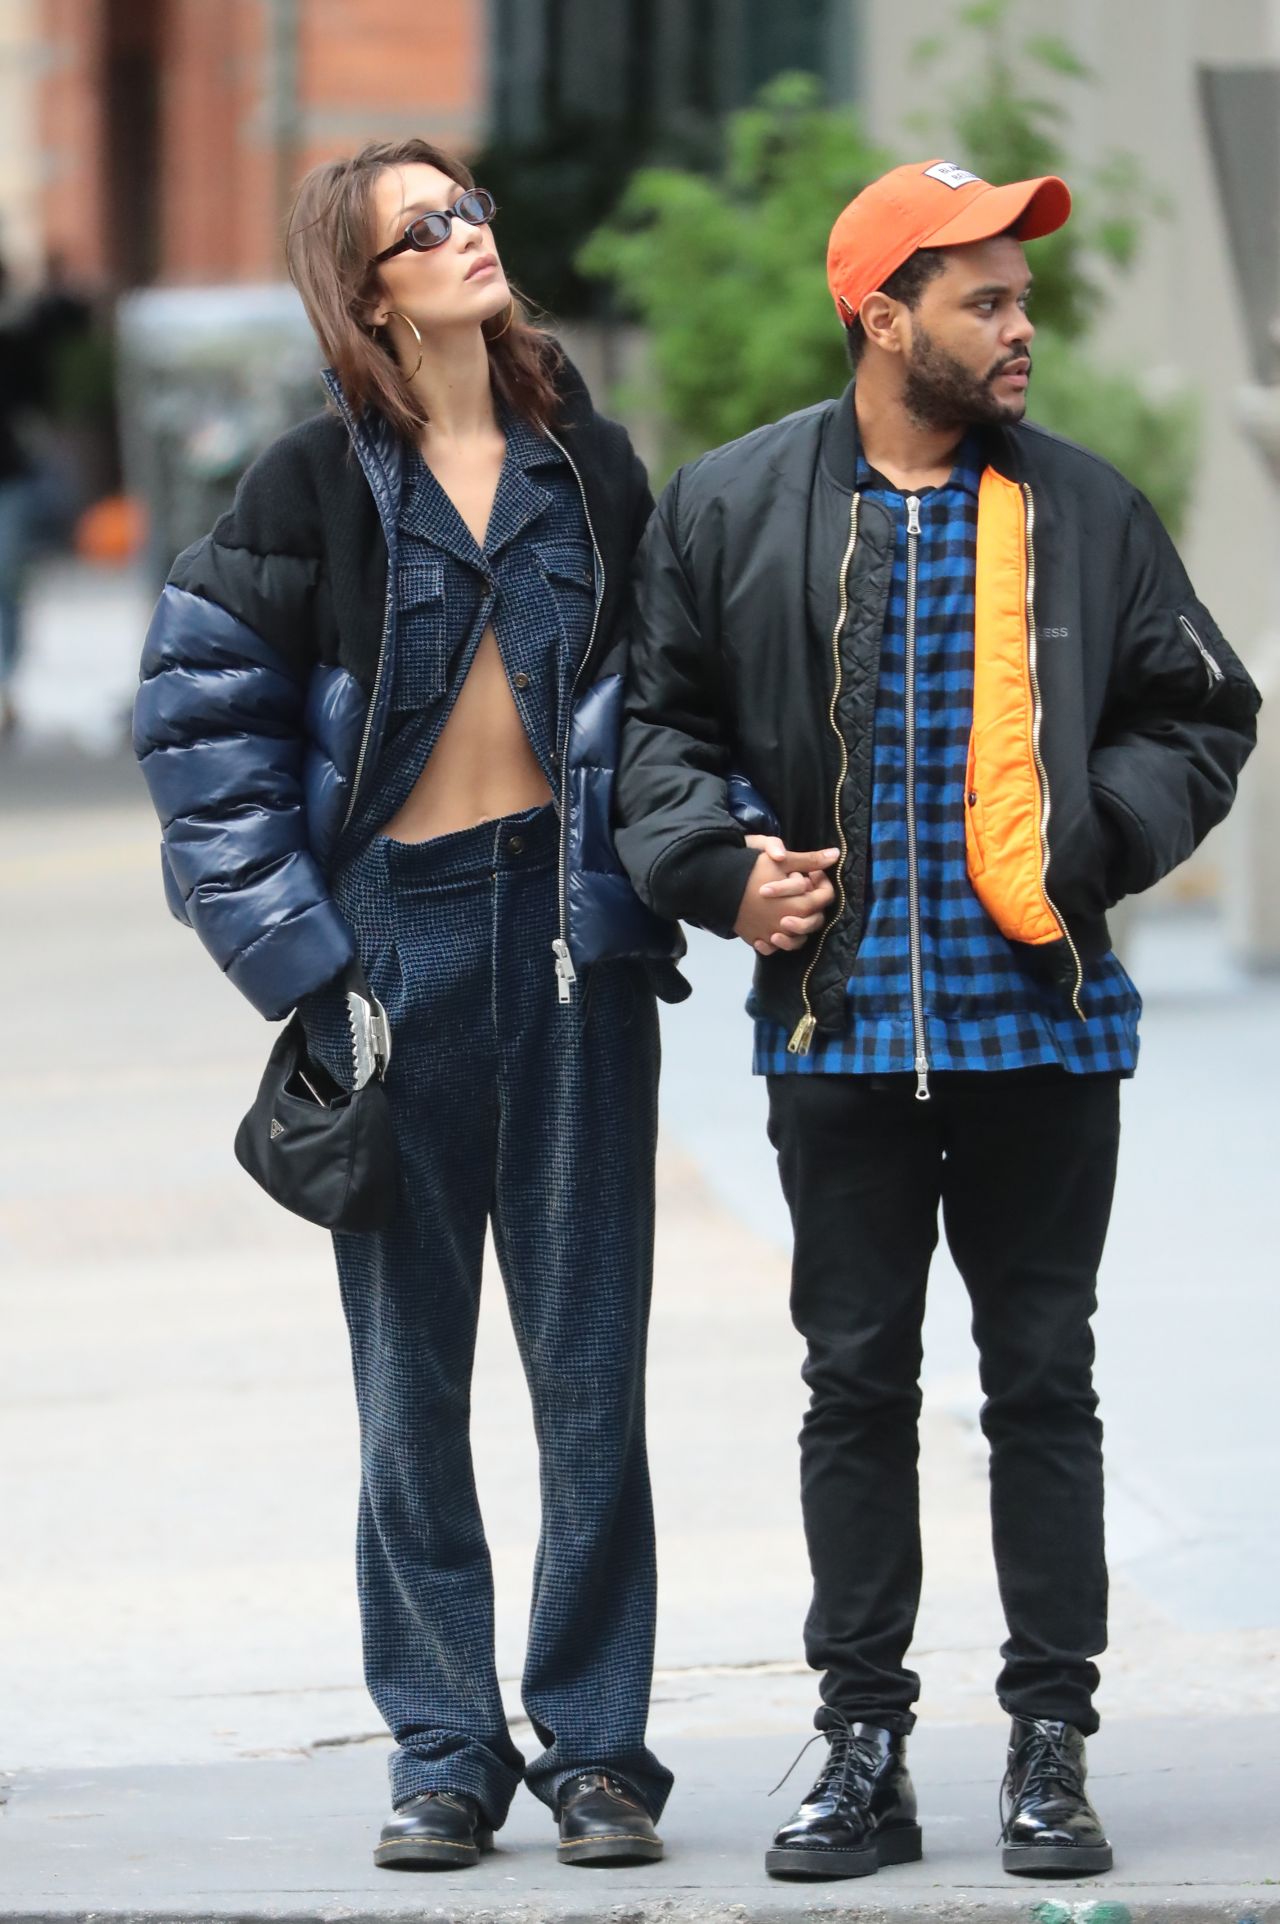 bella-hadid-and-the-weeknd-out-in-new-york-city-10-29-2018-1.jpg